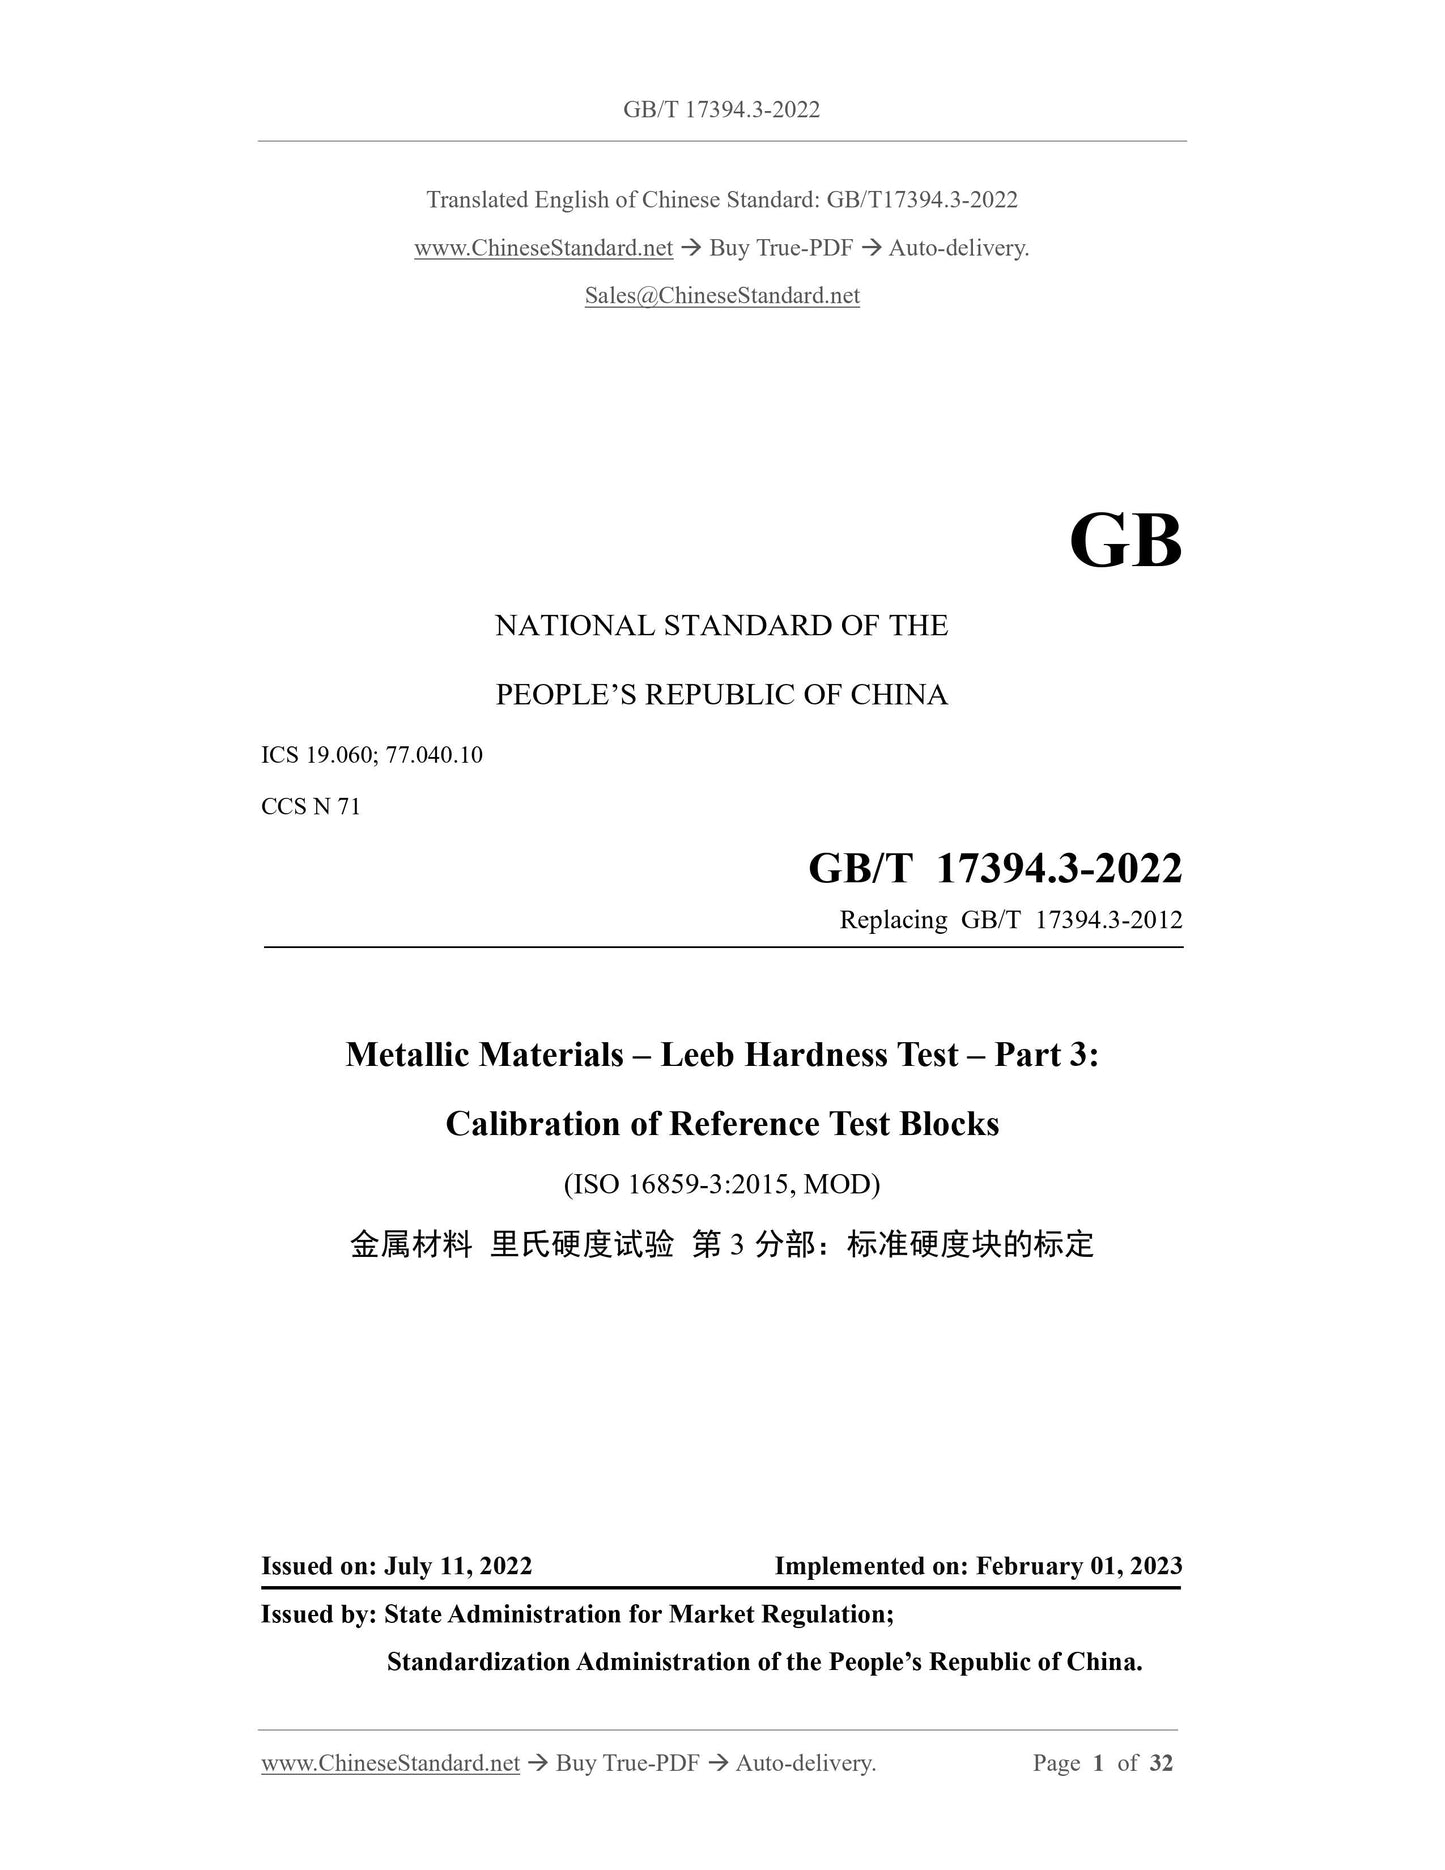 GB/T 17394.3-2022 Page 1